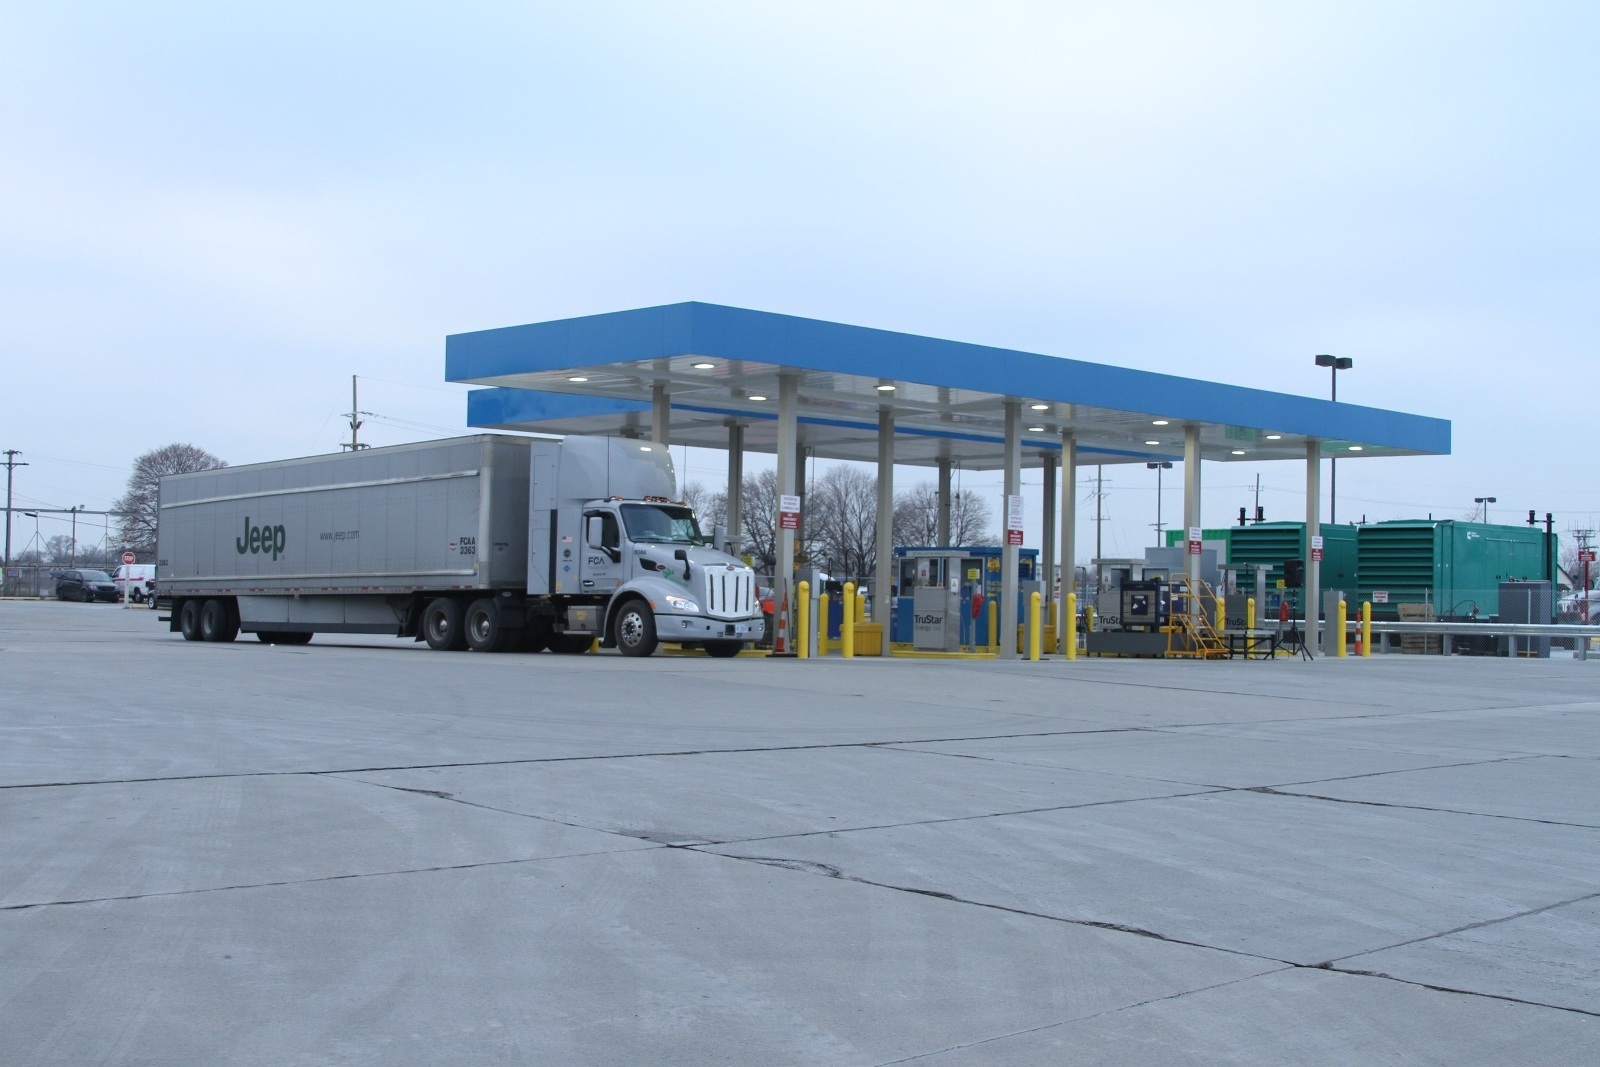 FCA US LLCs high-volume CNG fueling station, designed and built by TruStar Energy